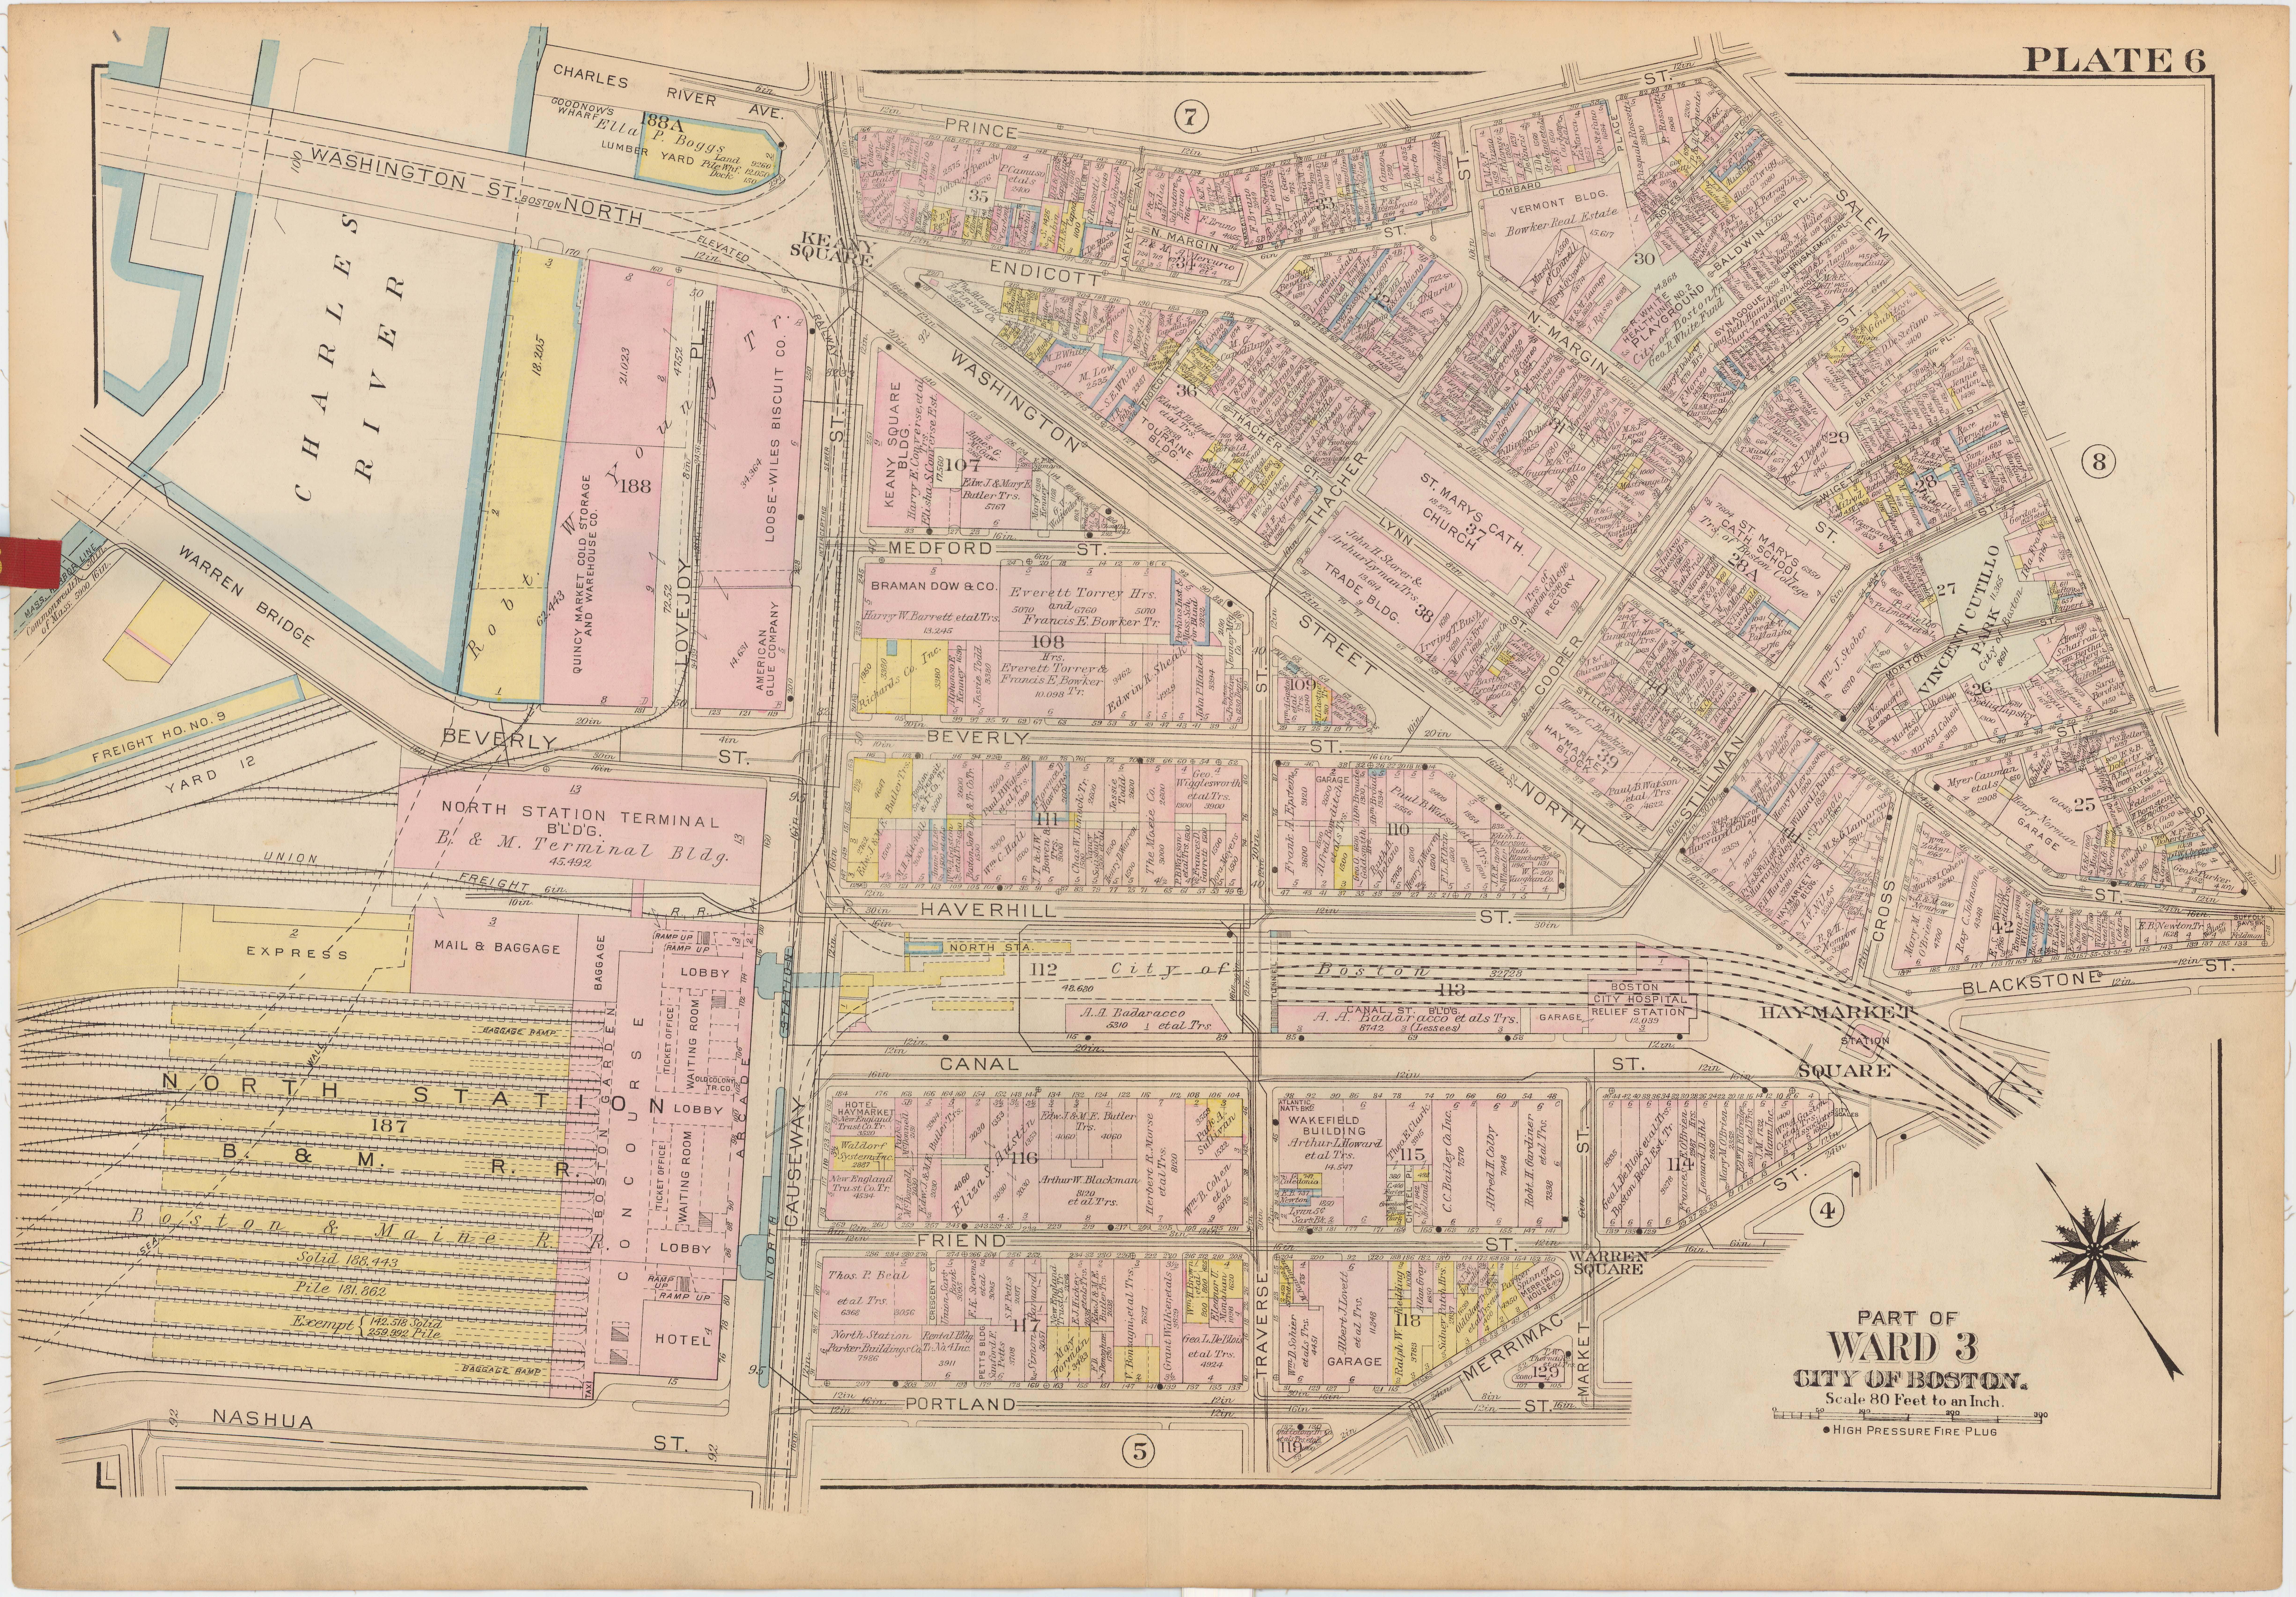 Image of “Plate 6” from “Atlas of the City of Boston: Boston Proper and Back Bay”